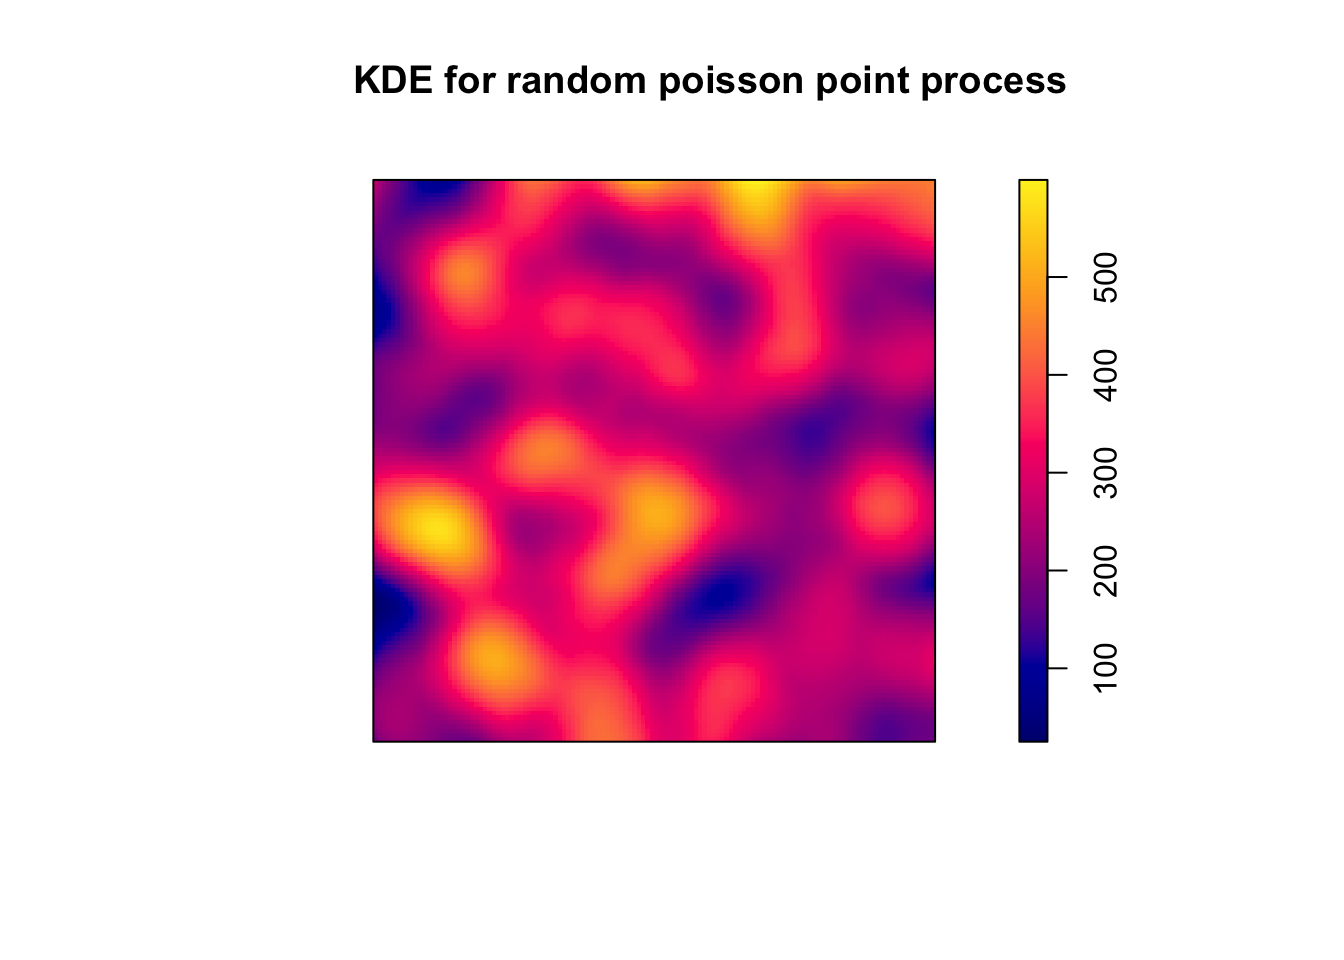 A square that is shaded blue to yellow, with the title 'KDE for random poisson point process'. To the right a gradient matches blue to red to yellow with increasing numbers. The hading varies smoothly, with hotspots of yellow distributed without pattern, fading into purples which connect to other yellows, and some cool blue areas.